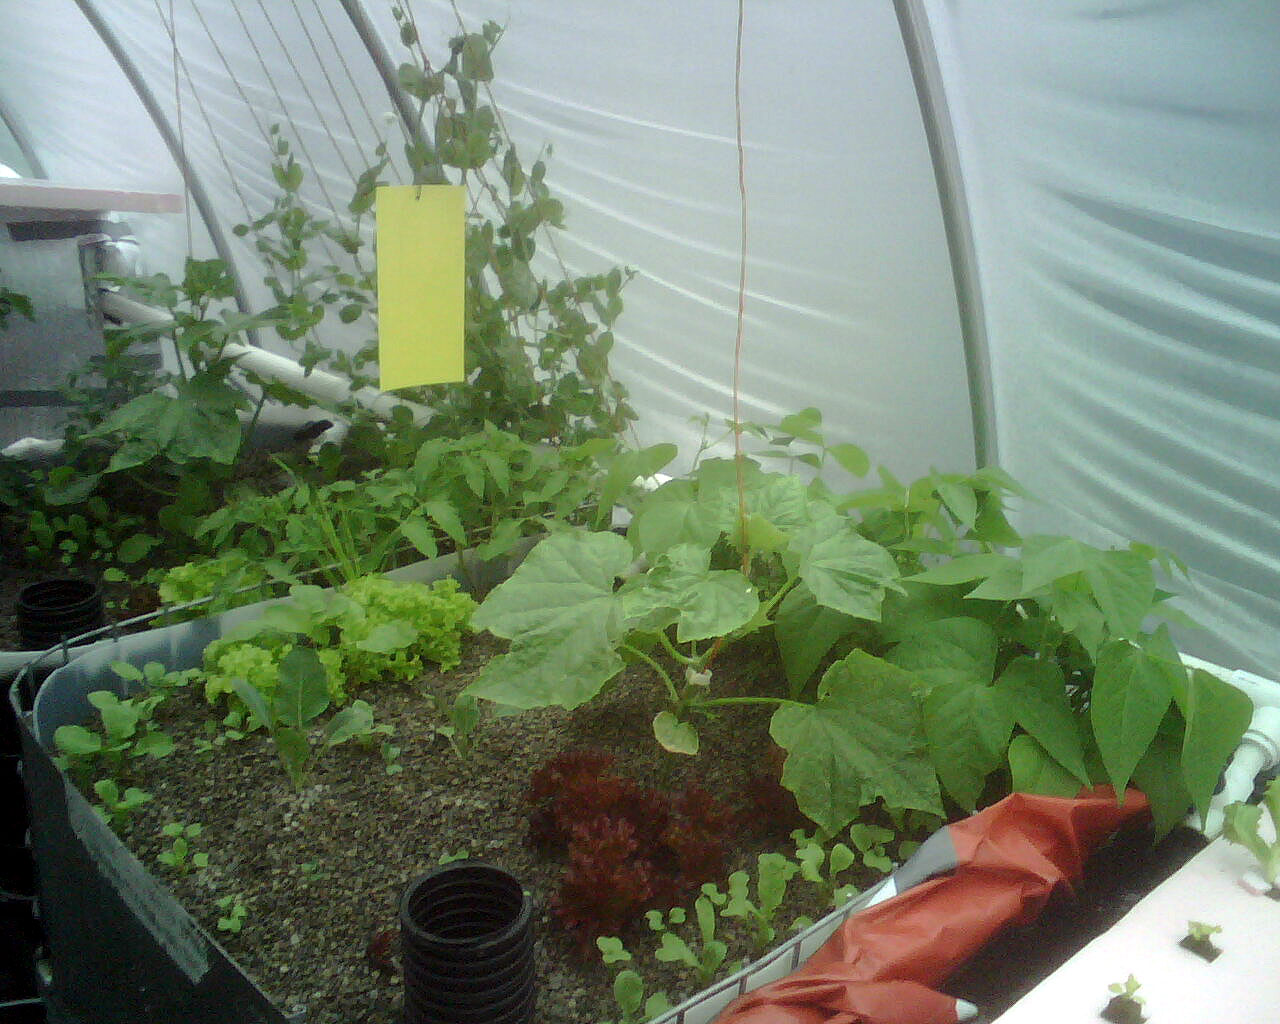 Utah Aquaponic System Construction and Early Startup